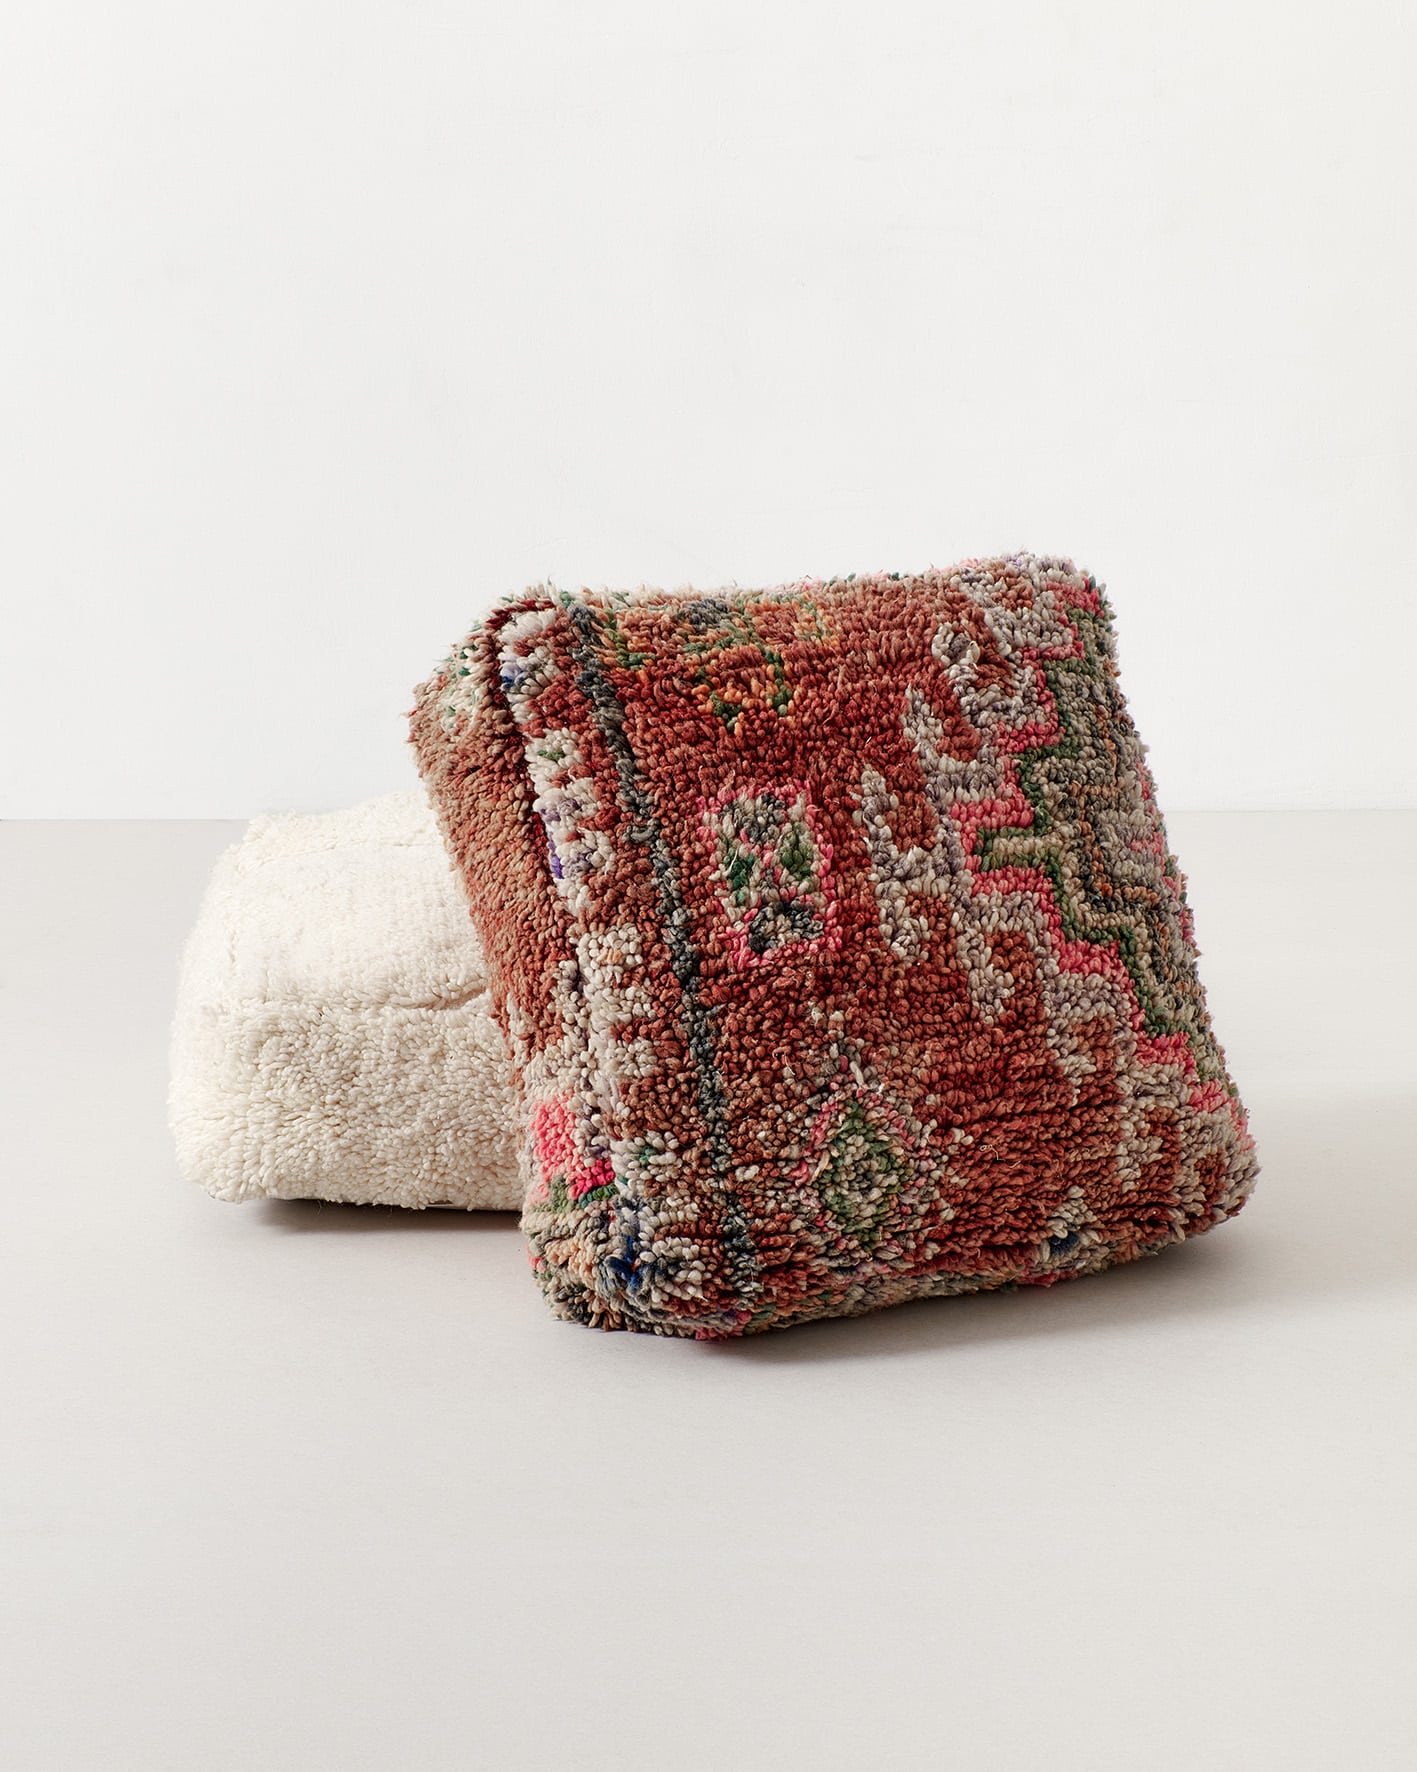 Richly decorated Moroccan pouf